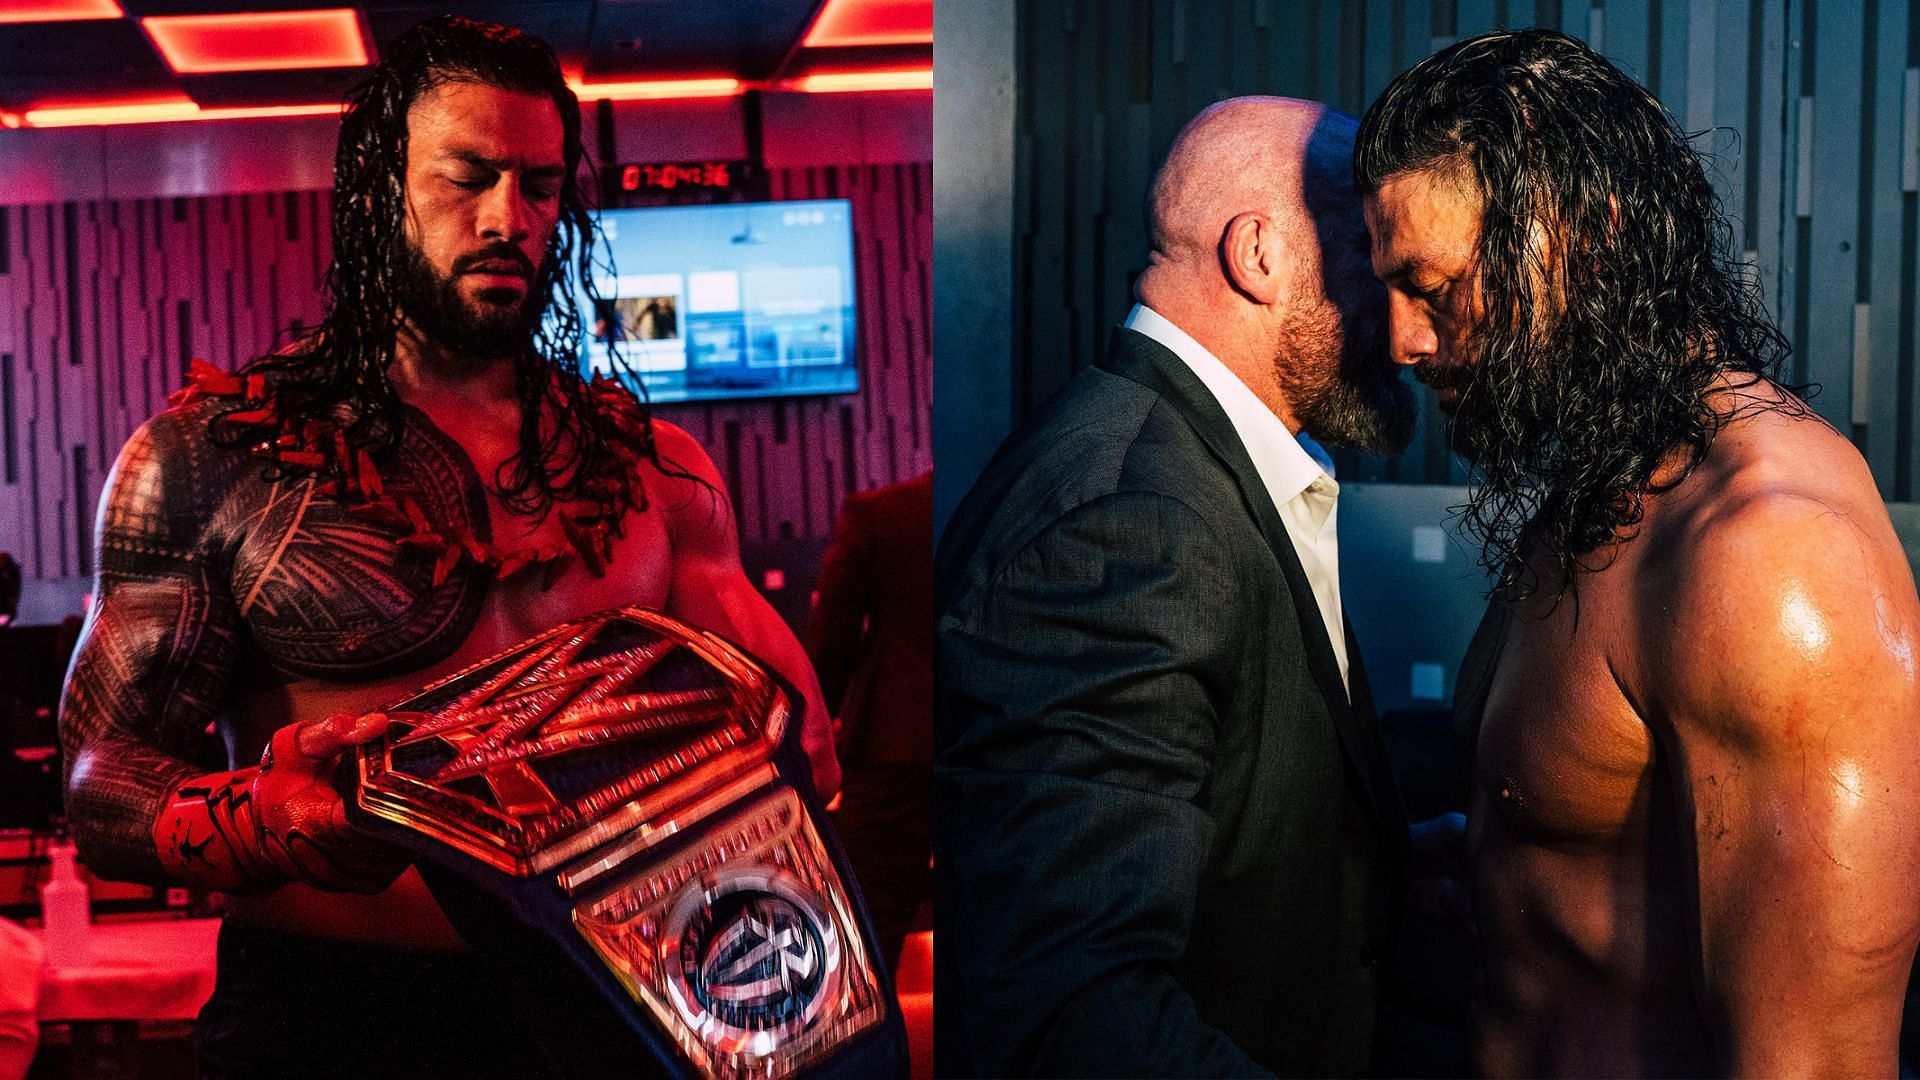 How long will Roman Reigns be able to hold on to his titles?